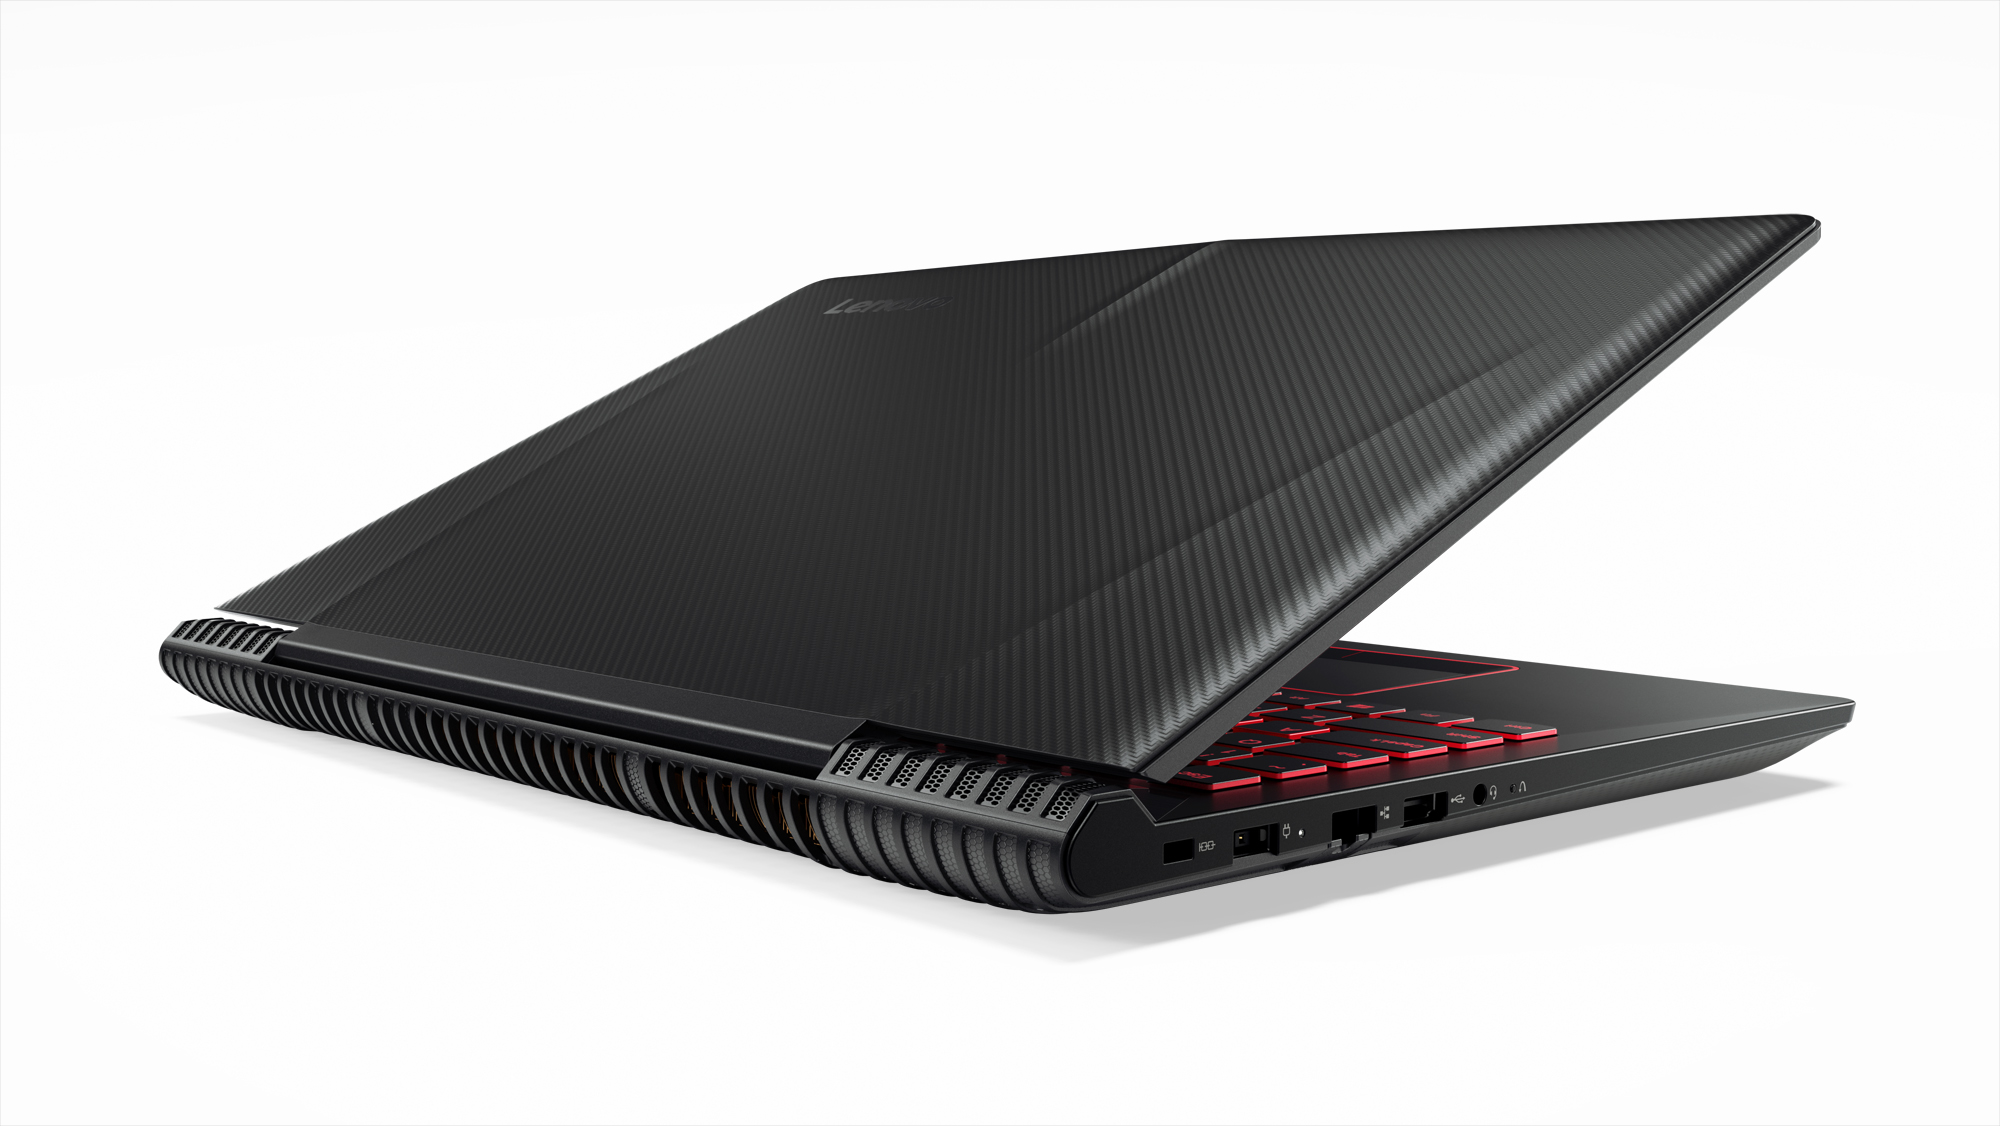 Lenovo Gaming Laptop 15.6", FHD Screen, Intel core i7-7700hq, 2.8-3.8 GHZ, Nvidia GeForce GTX 1050 Ti Graphic Card, 8GB DDR4 Memory, 1TB HDD, 80WK00T2US - image 5 of 17